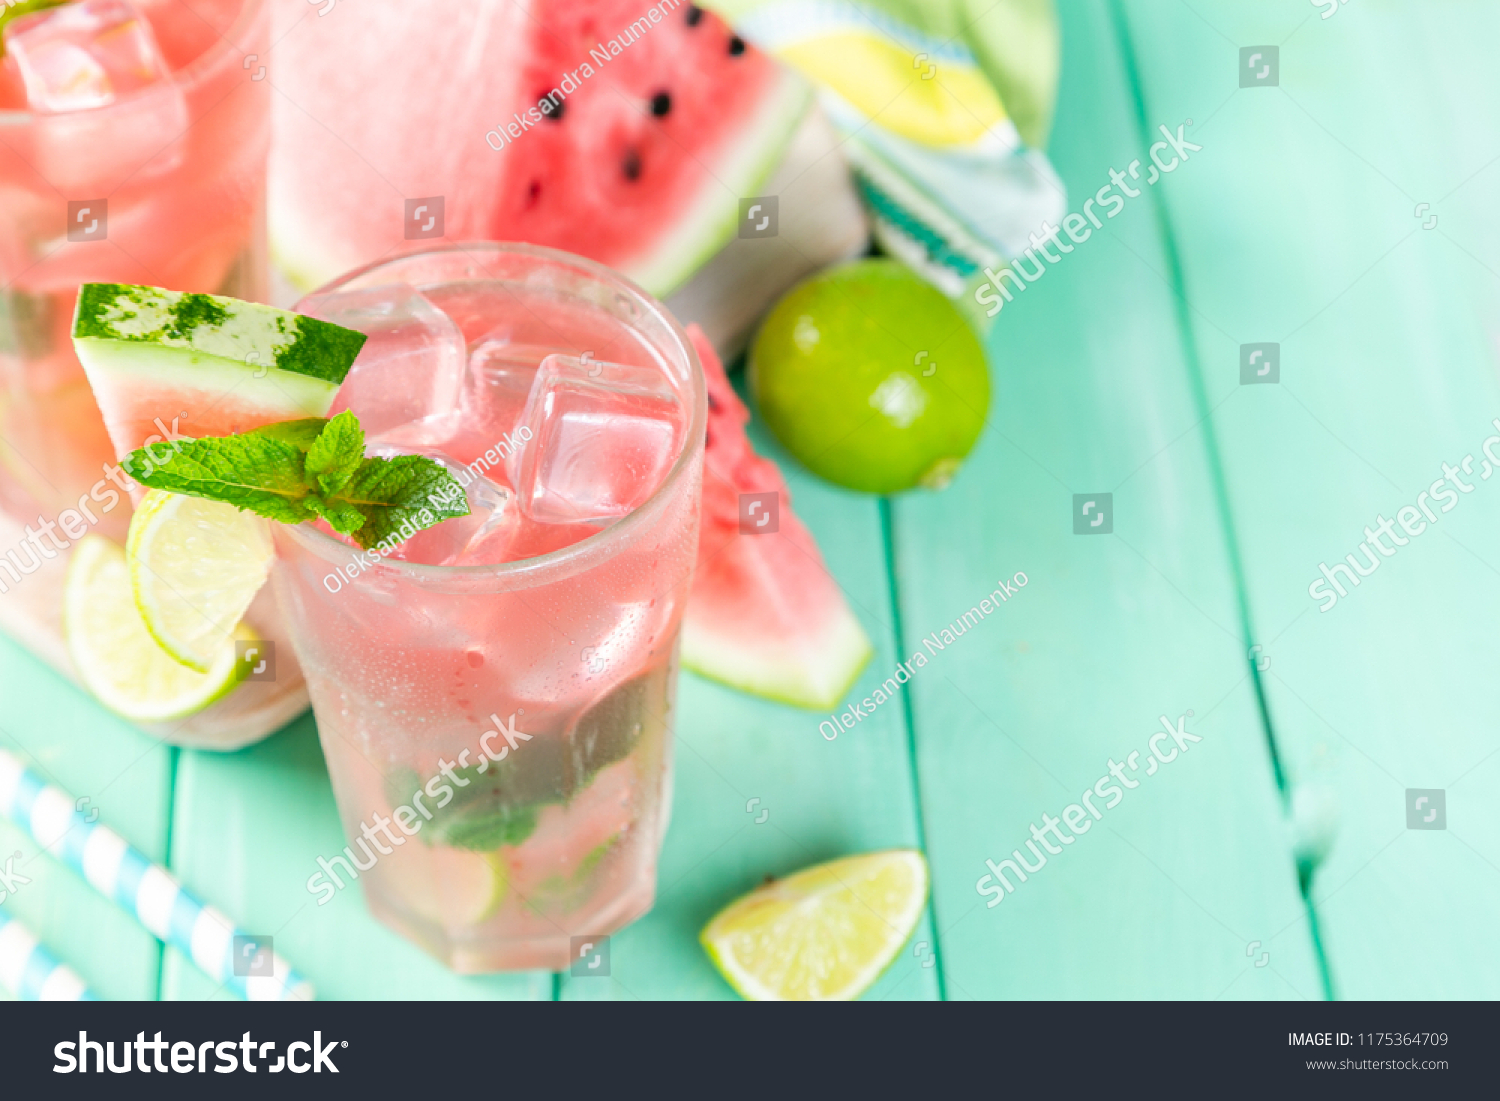 Watermelon lemonade with lime and mint, wood background, copy space #1175364709